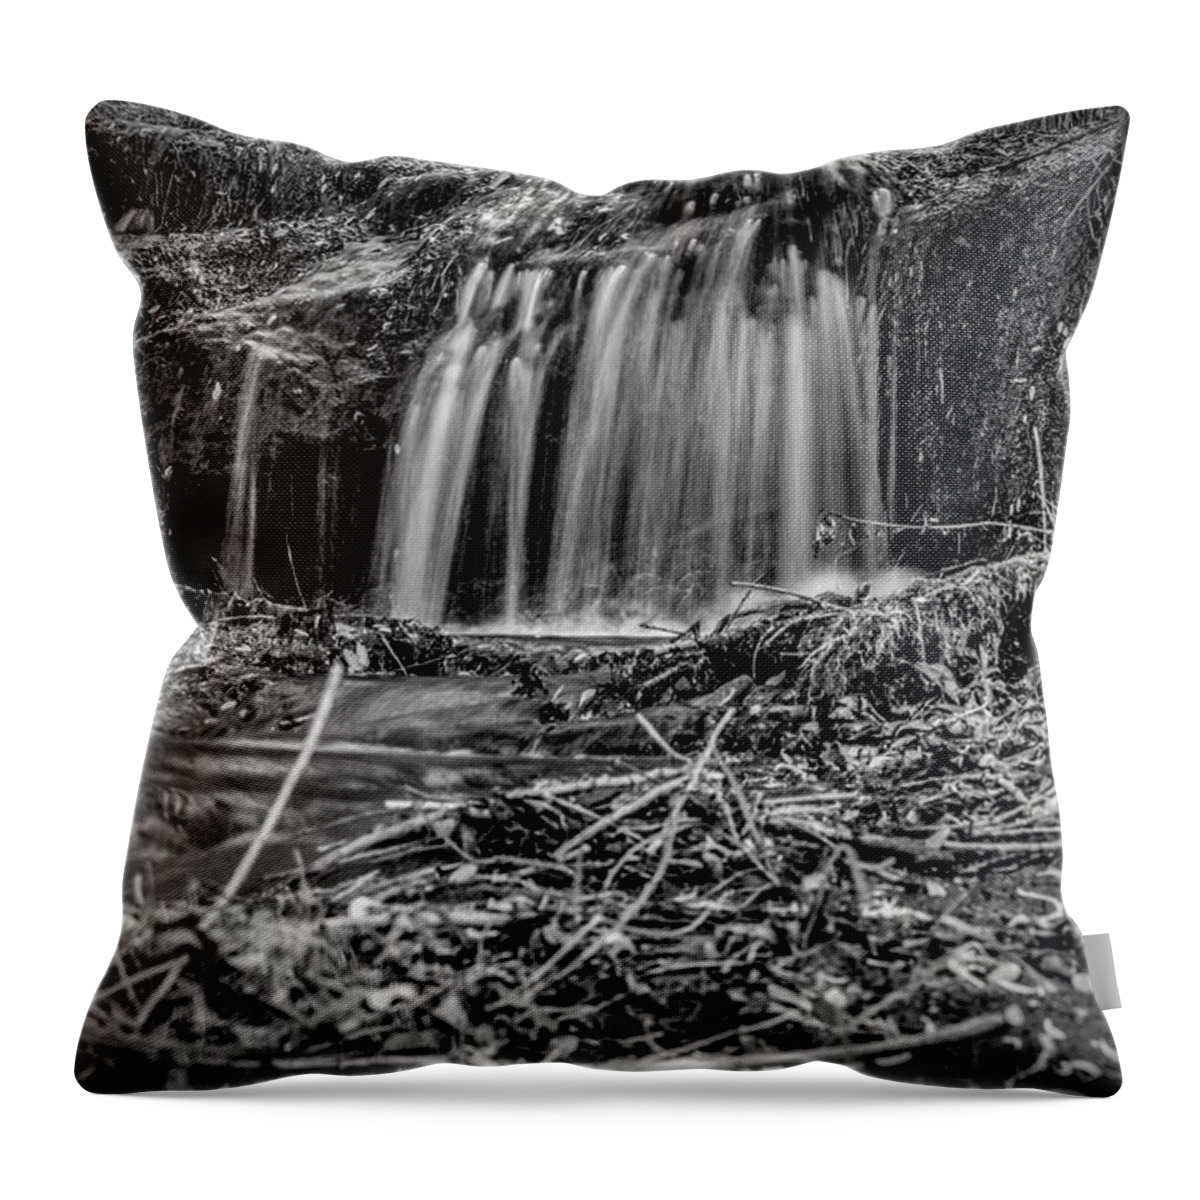 Waterfall Throw Pillow featuring the photograph Wispy Falls by Michael Brungardt